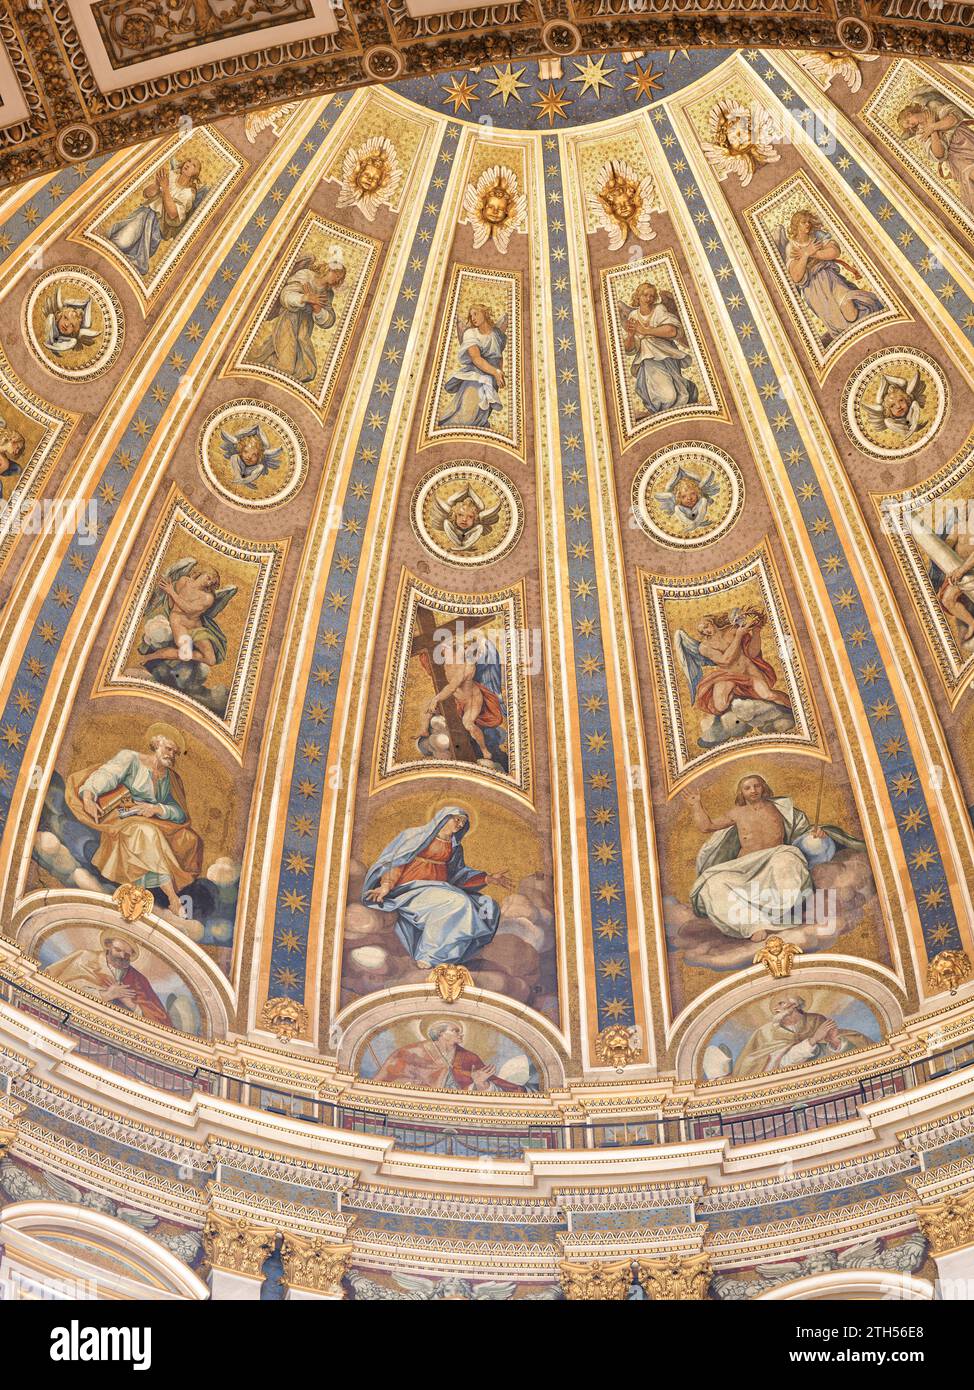 Mosaic illustrations on the underside of the main dome in the basilica of St Peter, Vatican, Rome, Italy. Stock Photo